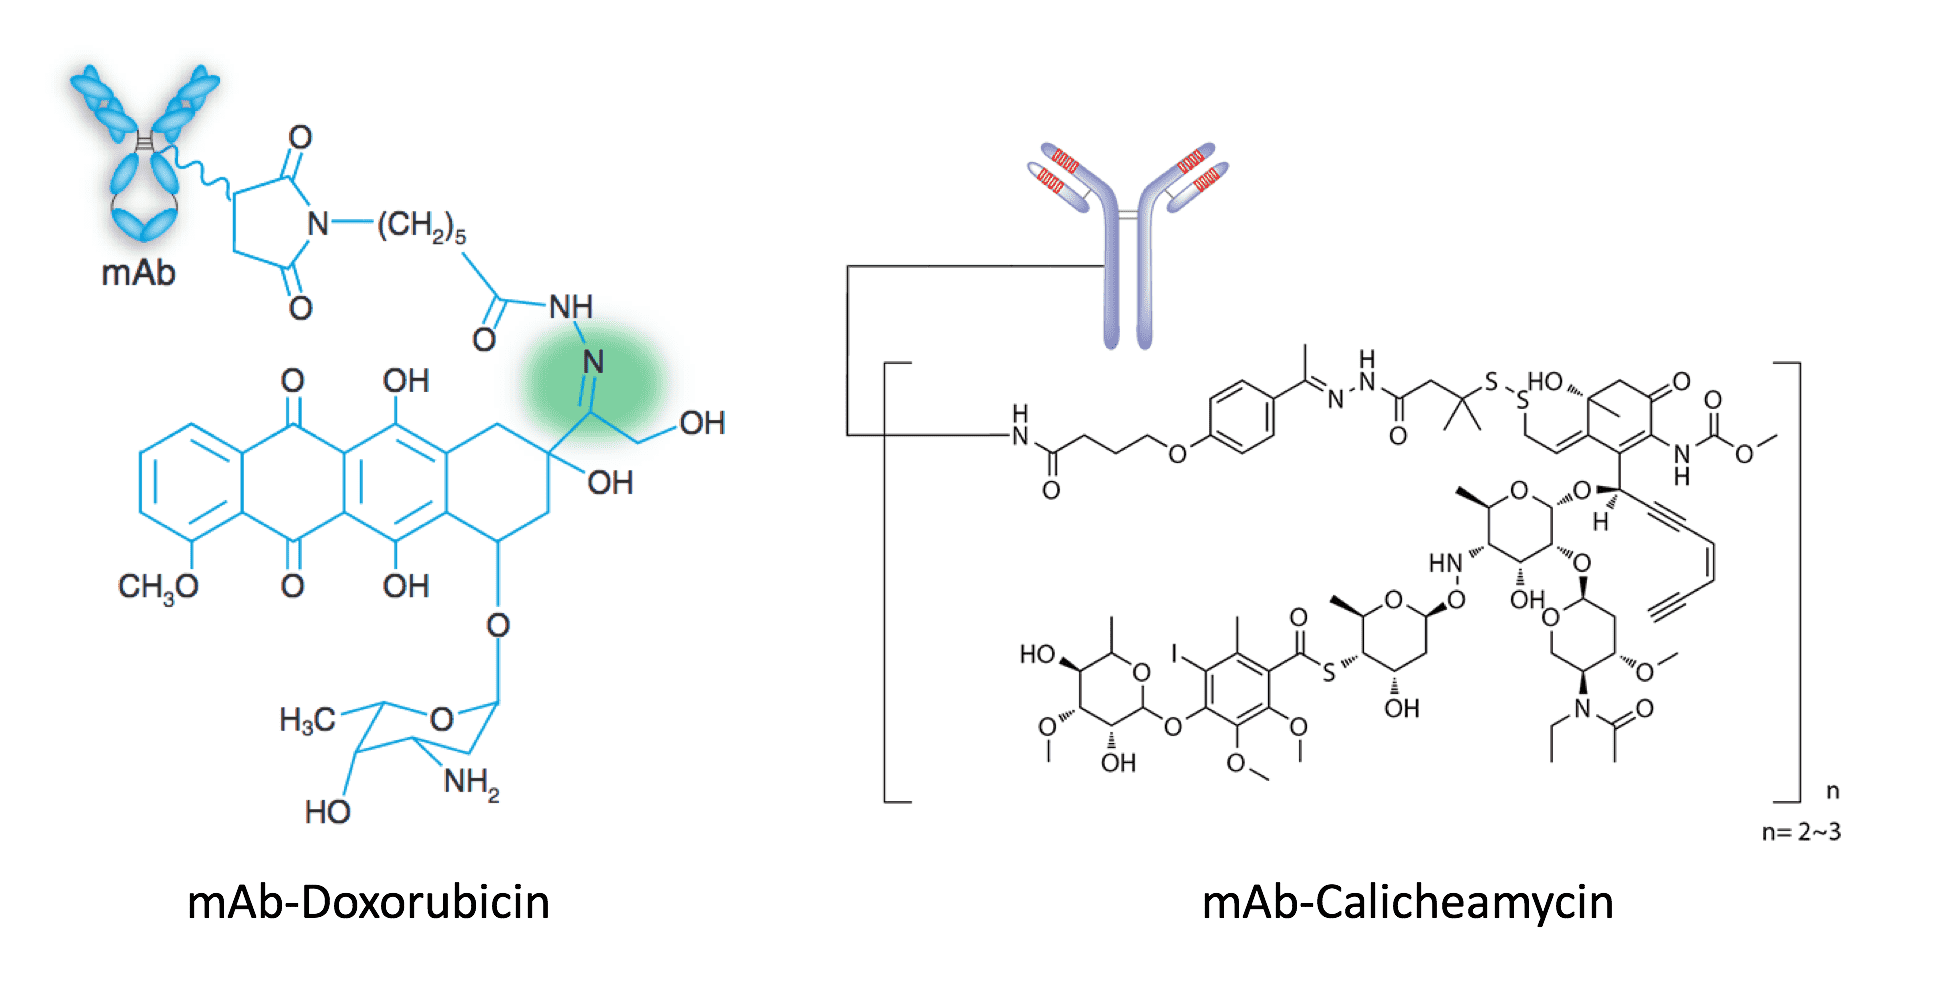 ADC prepared using pH-sensitive linkers. ADC payloads such as doxorubicin (left, Nat. Biotechnol., 2005) and calicheamycin (right, Discov. Med., 2010) are conjugated with mAb via pH-sensitive hydrazone linkers to ensure drug release under acidic conditions within the endosome or lysosome of target cells.